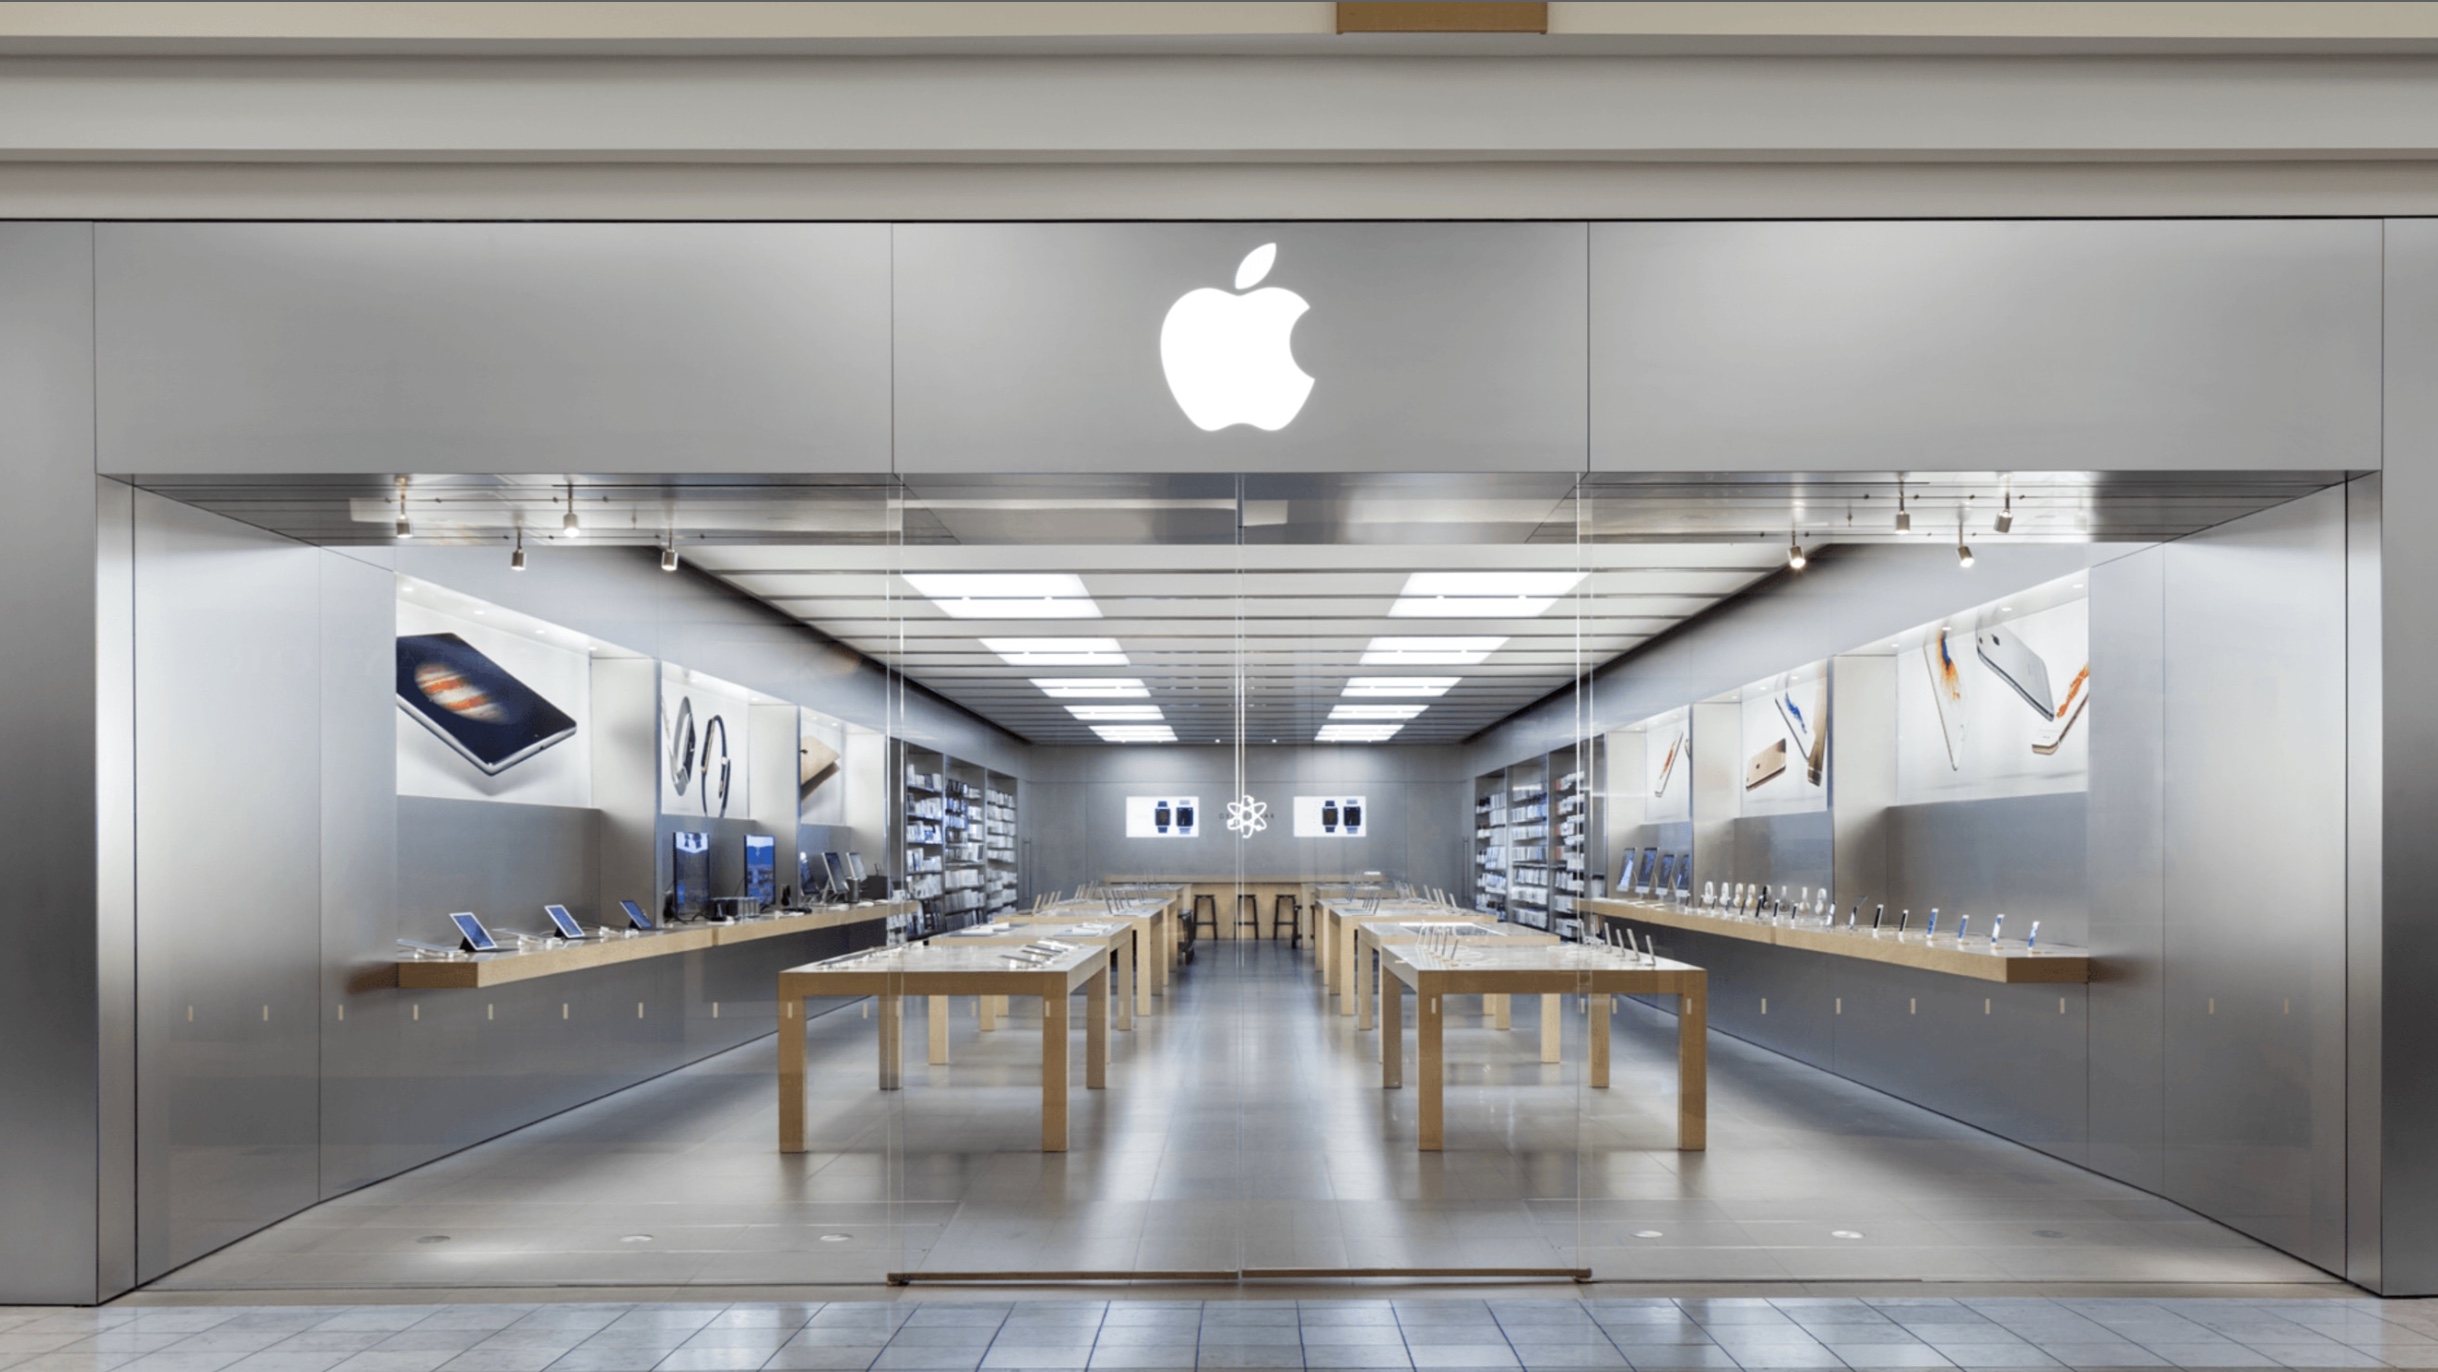 St. Louis Apple Store employees blame union for organizing withdrawal